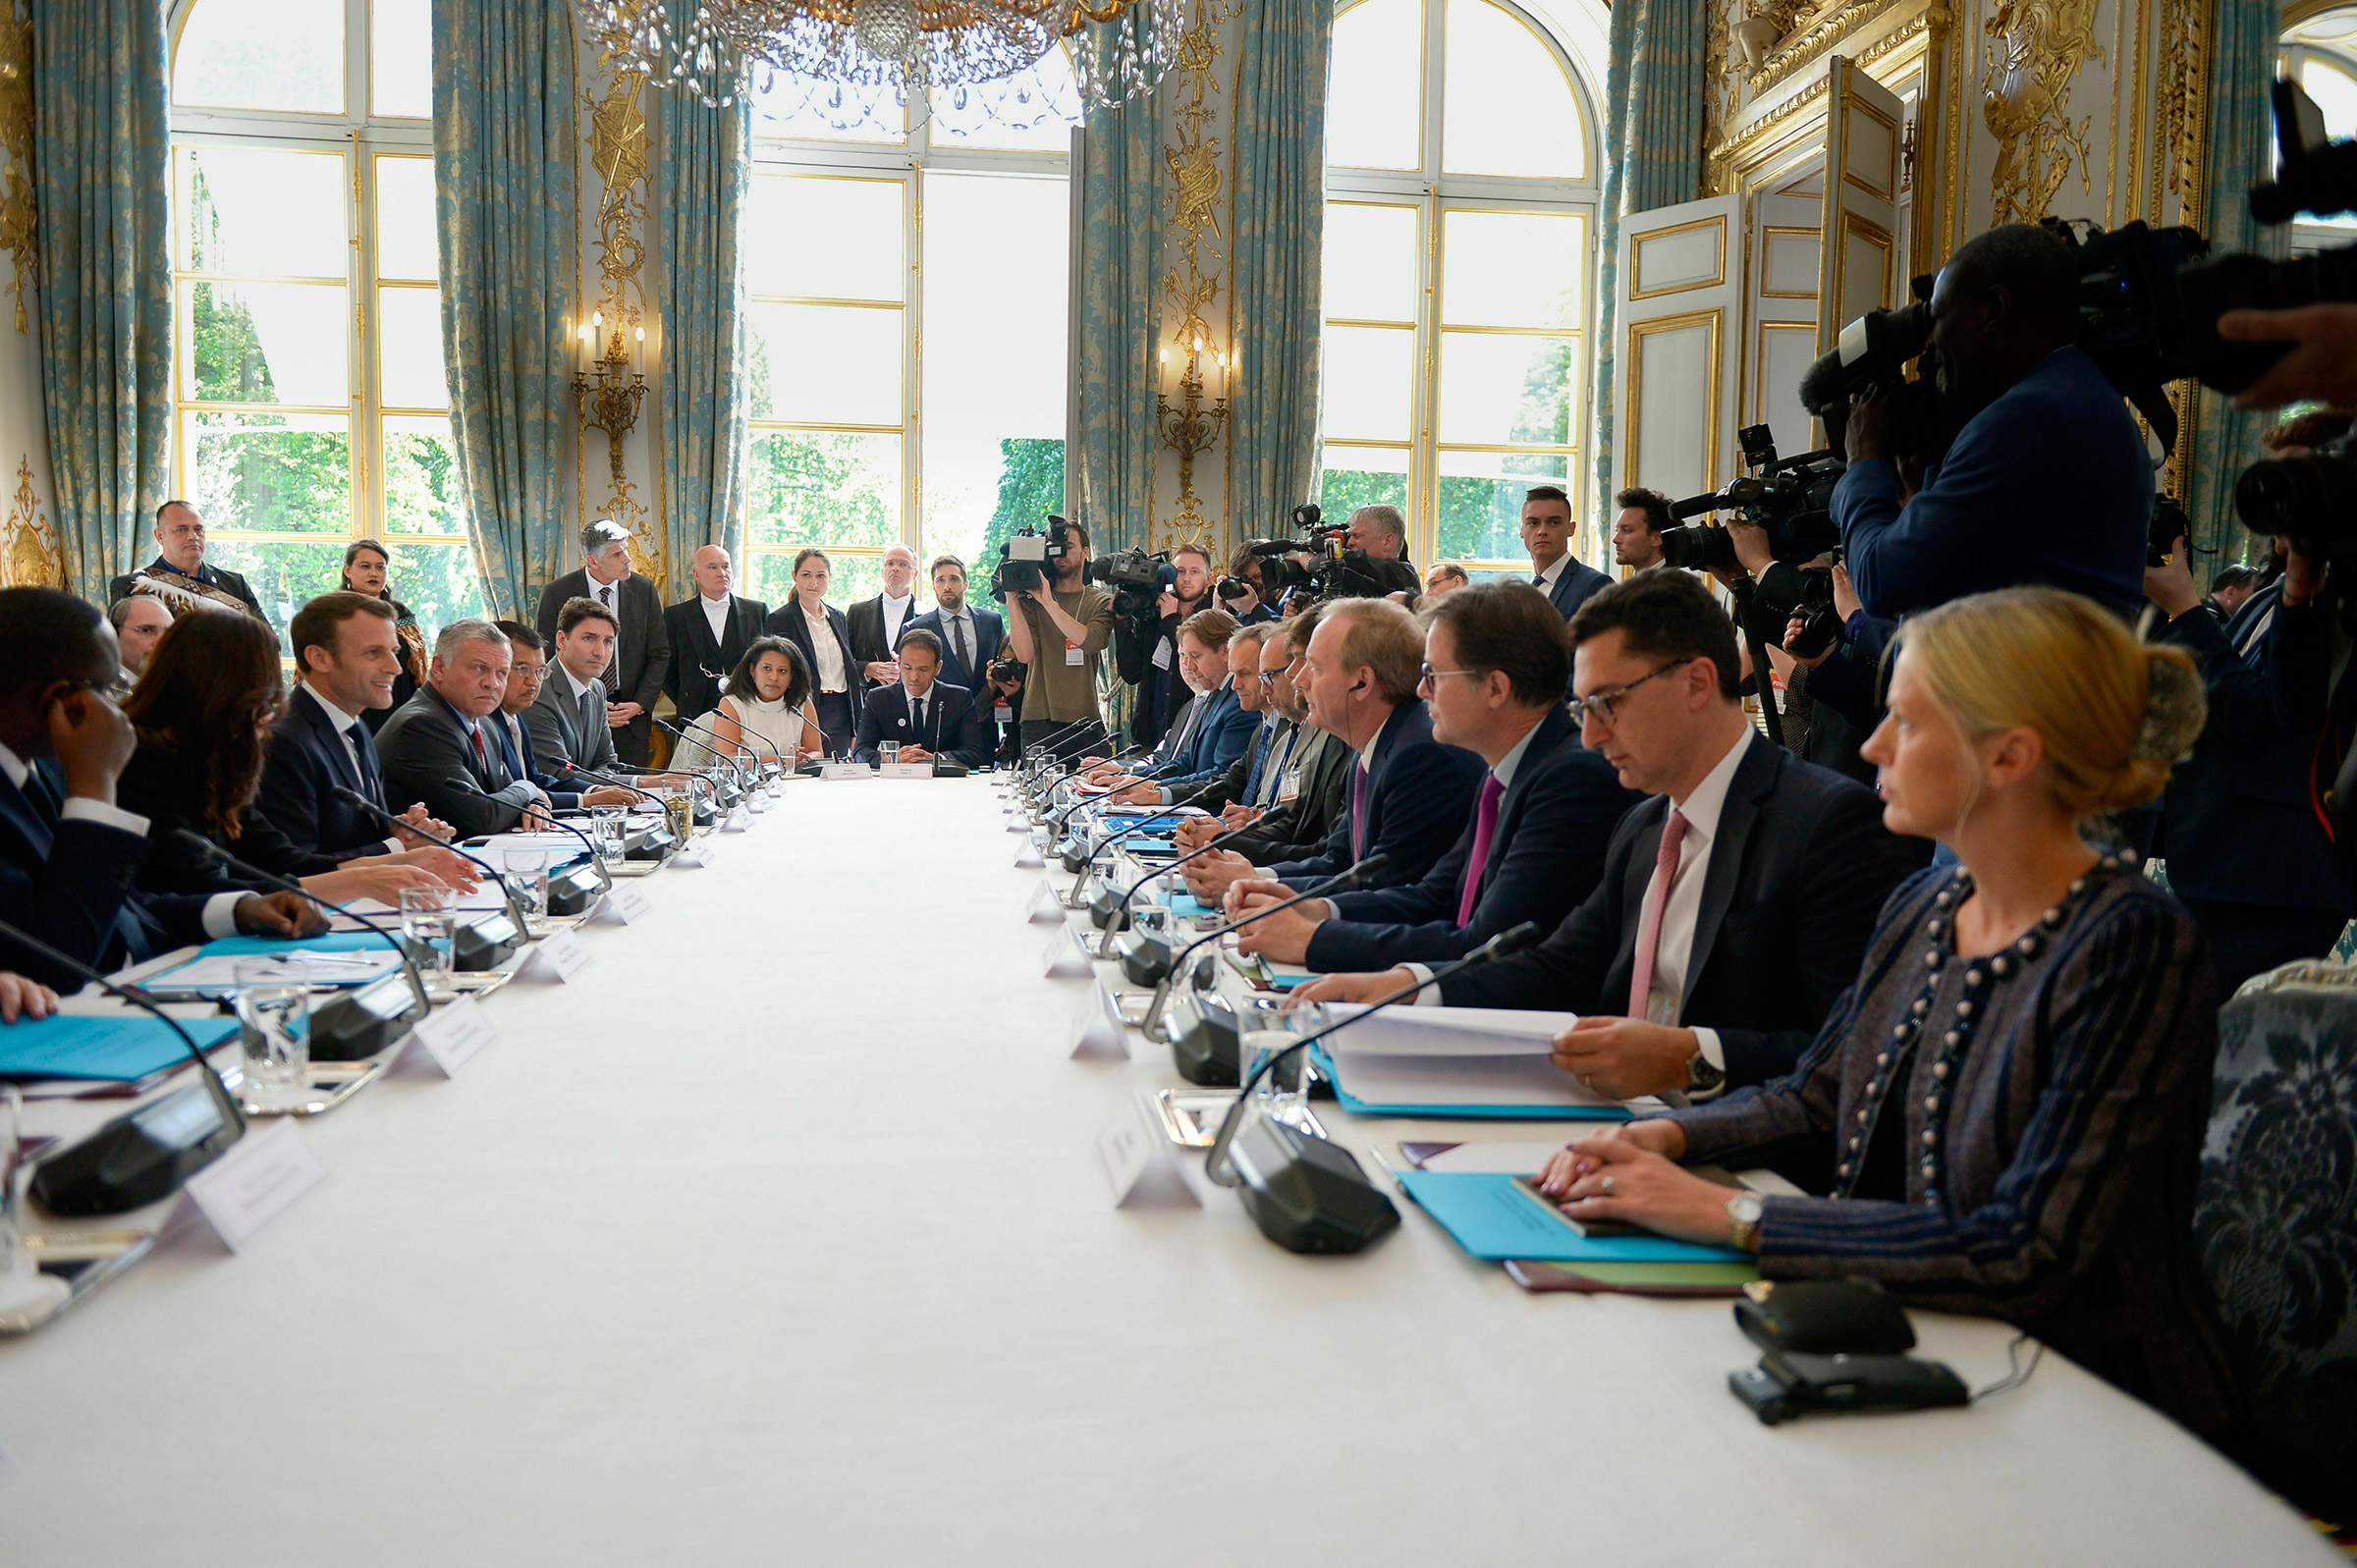 Smith, fourth from bottom right, at a Tech for Good summit with world leaders and top business executives, hosted by French President Emmanuel Macron at the Élysée Palace on May 15 (Isa Harsin—SIPA/AP)